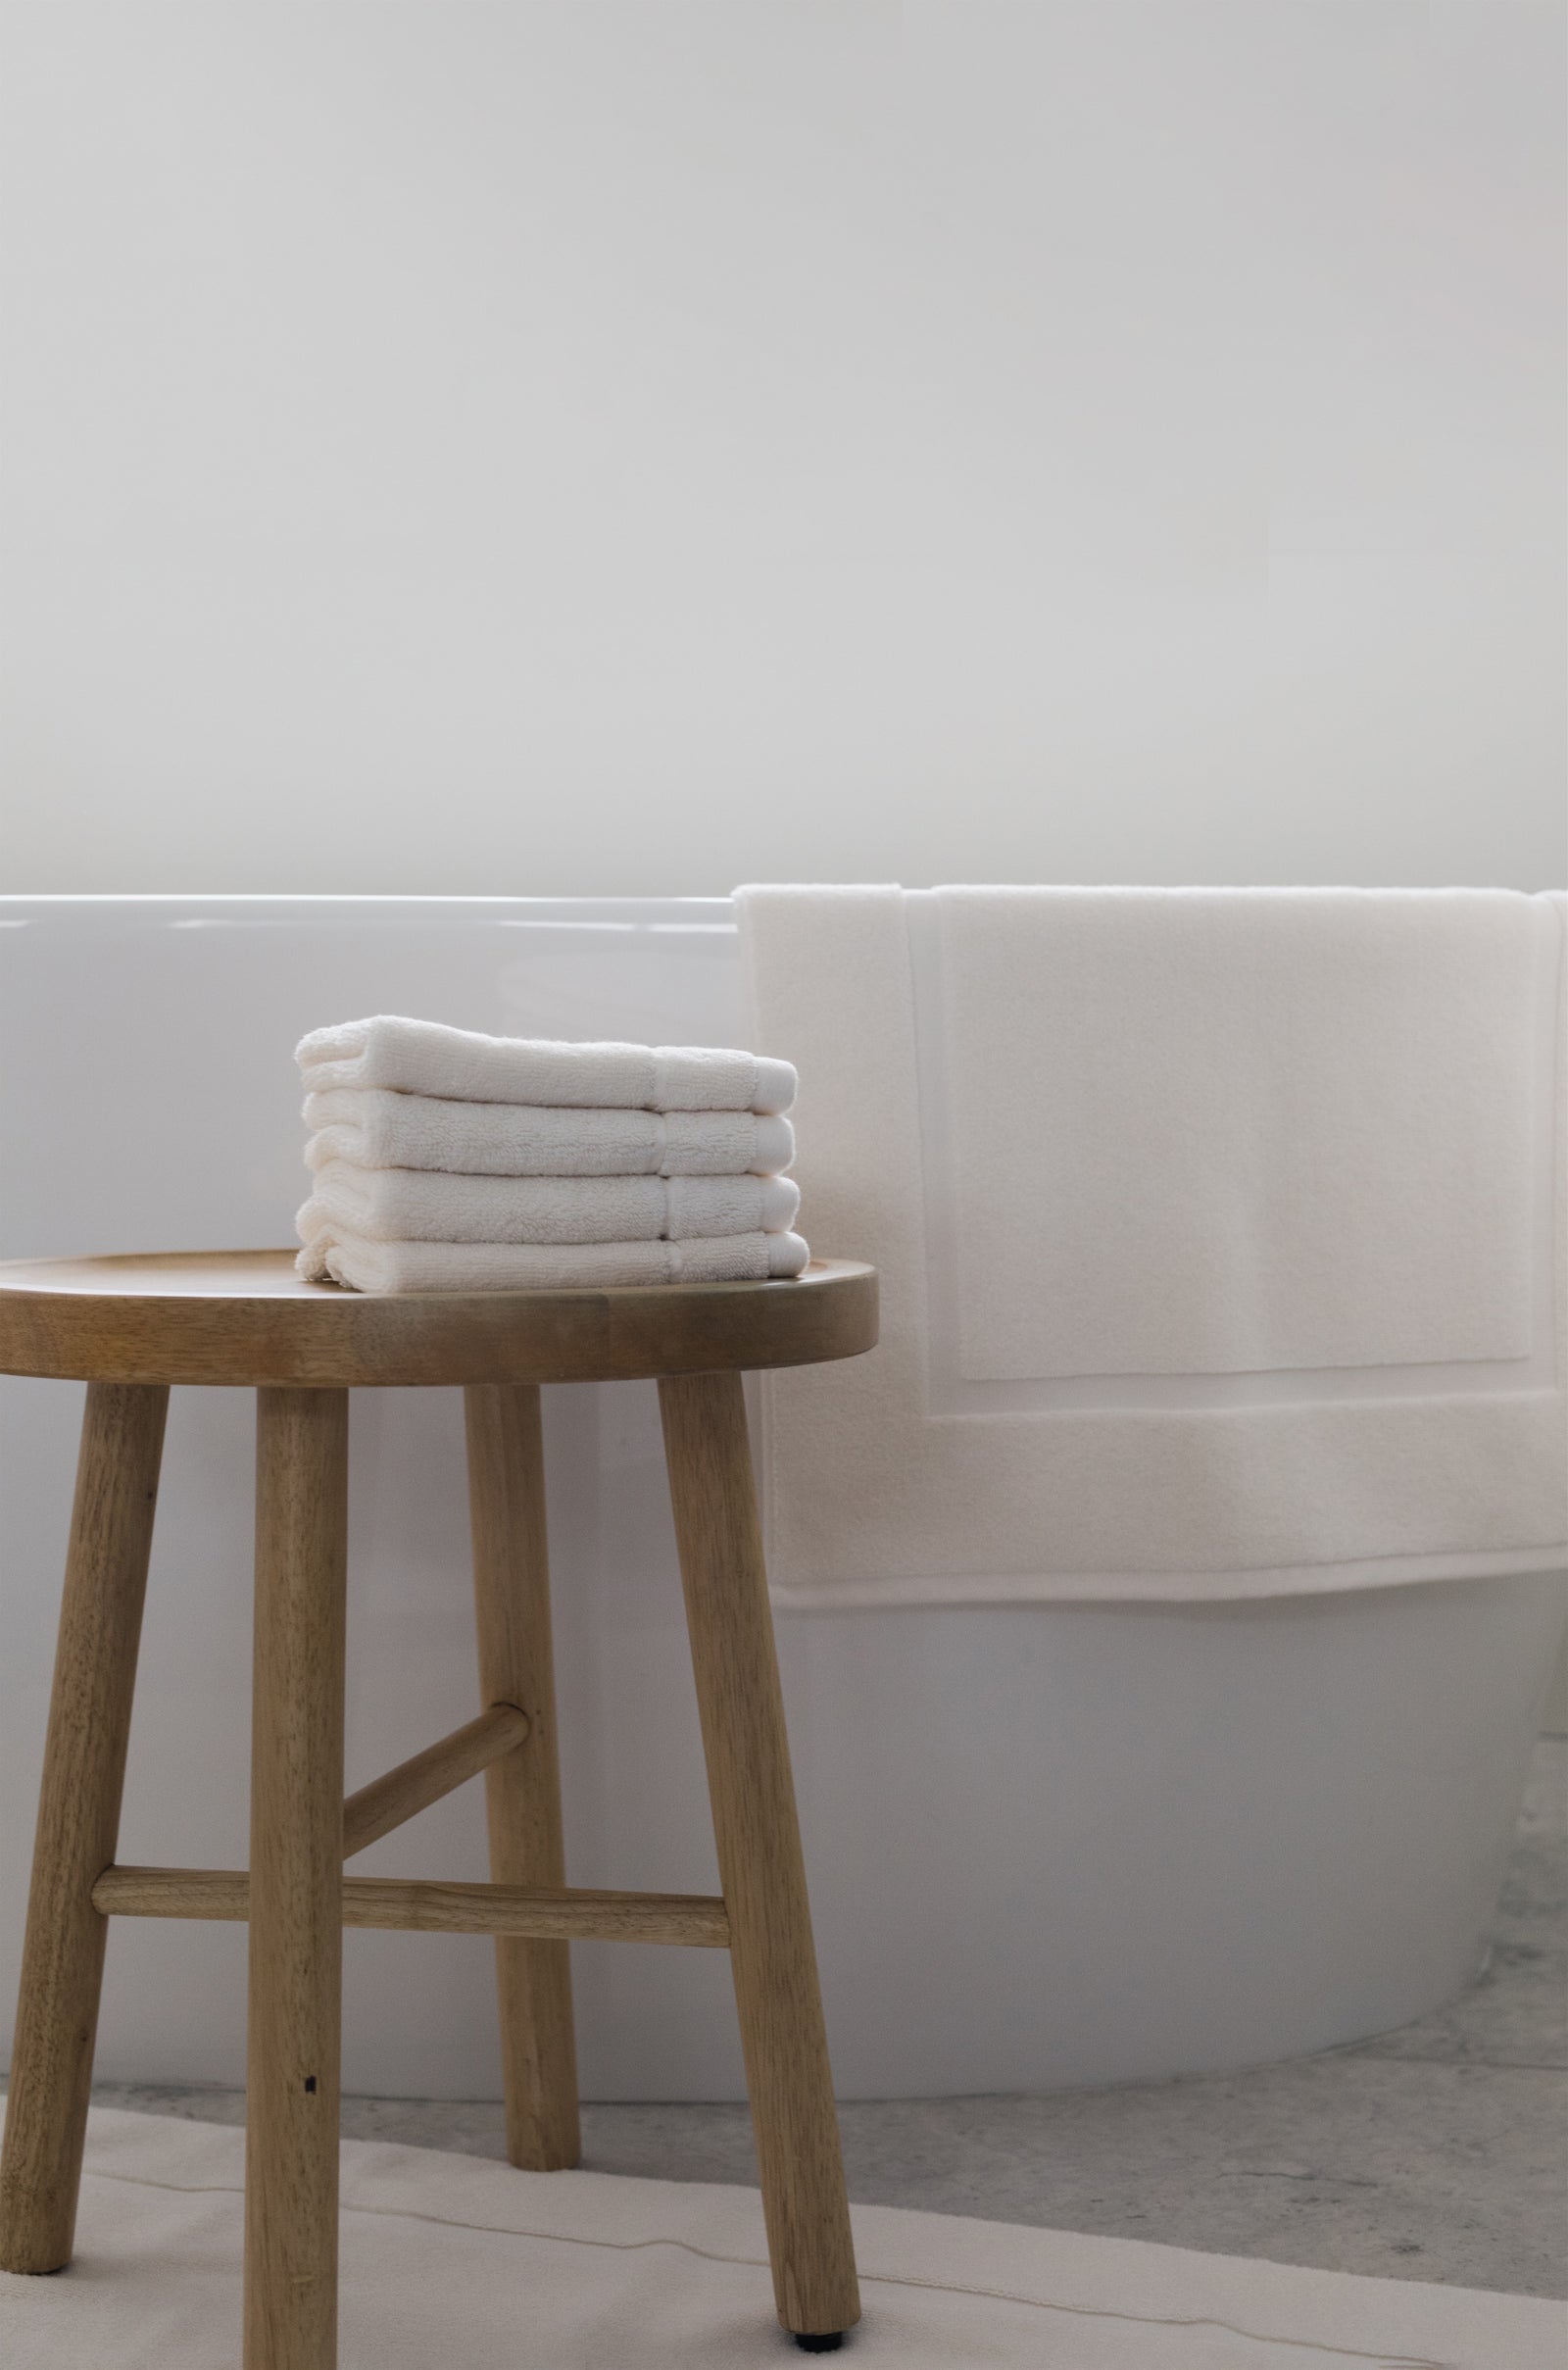 Creme Premium Plush Bath Mat resting on white bathtub. The photo was taken in a bathroom showing a wooden stool with wash cloths next to the bathtub.